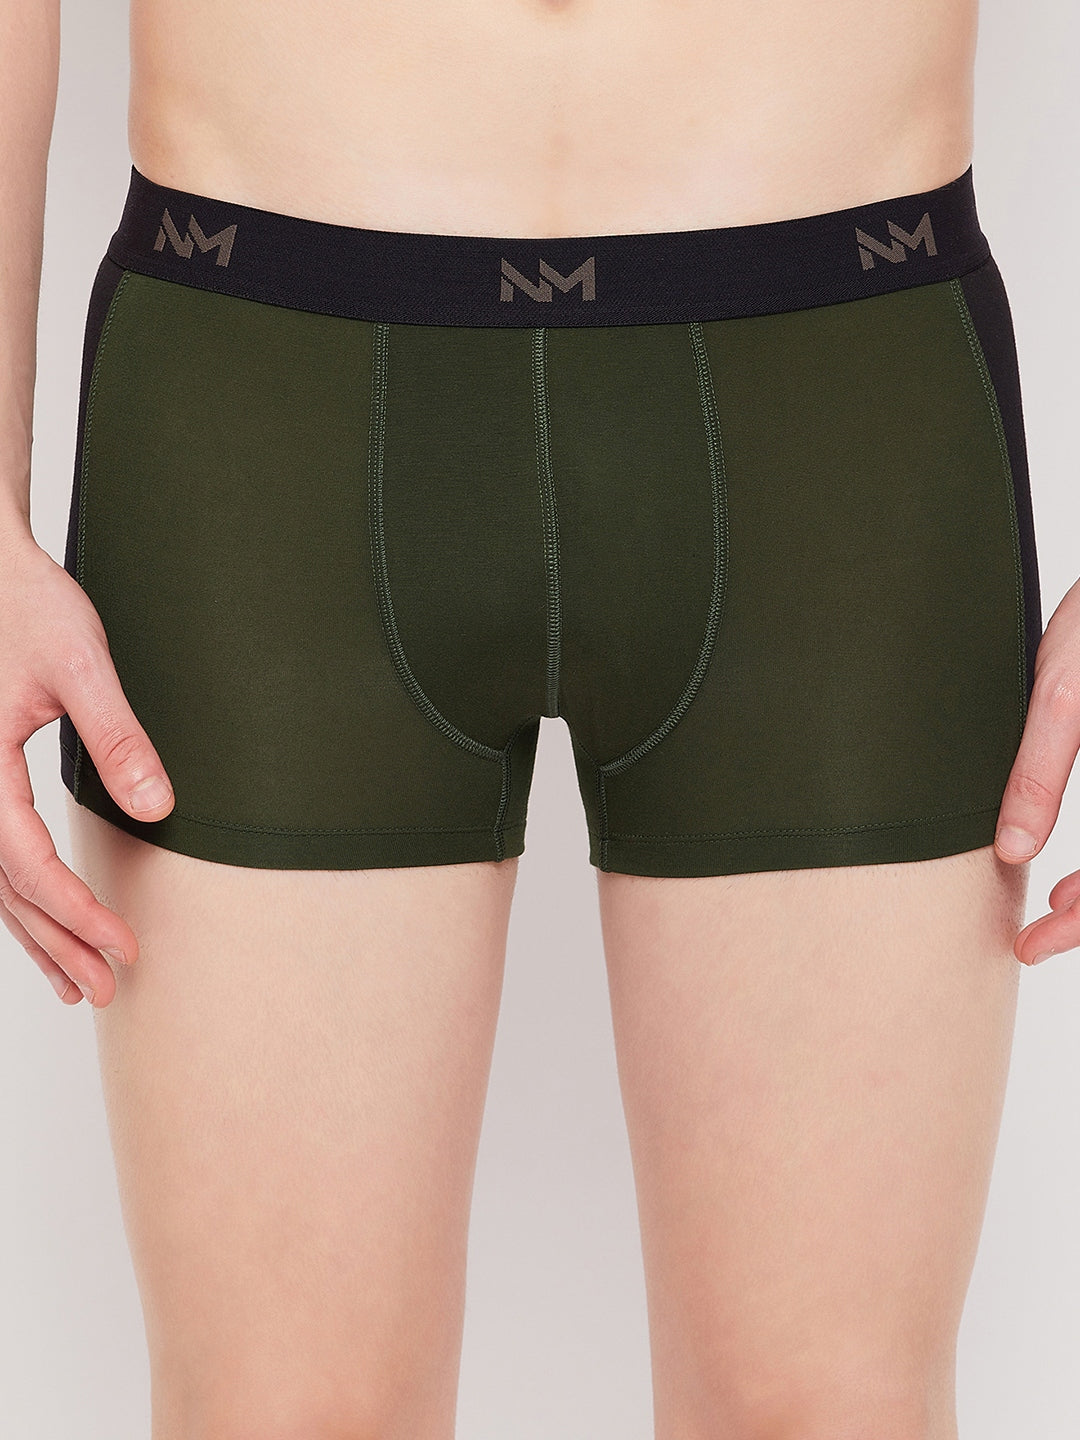 Neva Modal Solid Short Trunk Underwear for Men- Olive, Maroon, Blue Collection (Pack of 3)